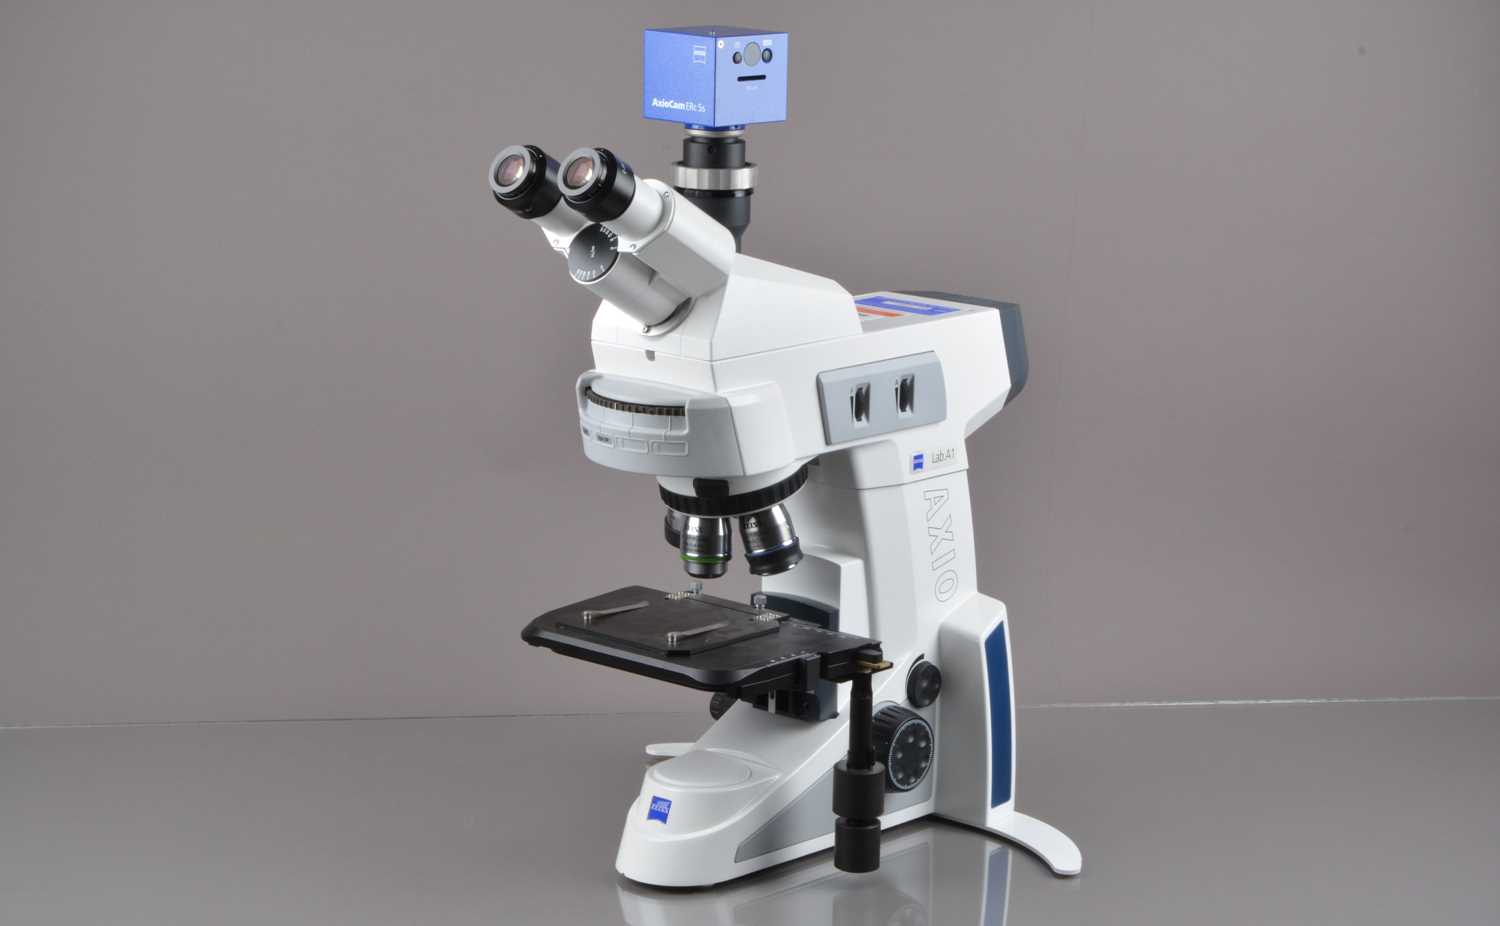 Lot 553 - Zeiss Axio Lab A1 with Axio-Cam Erc 5s head